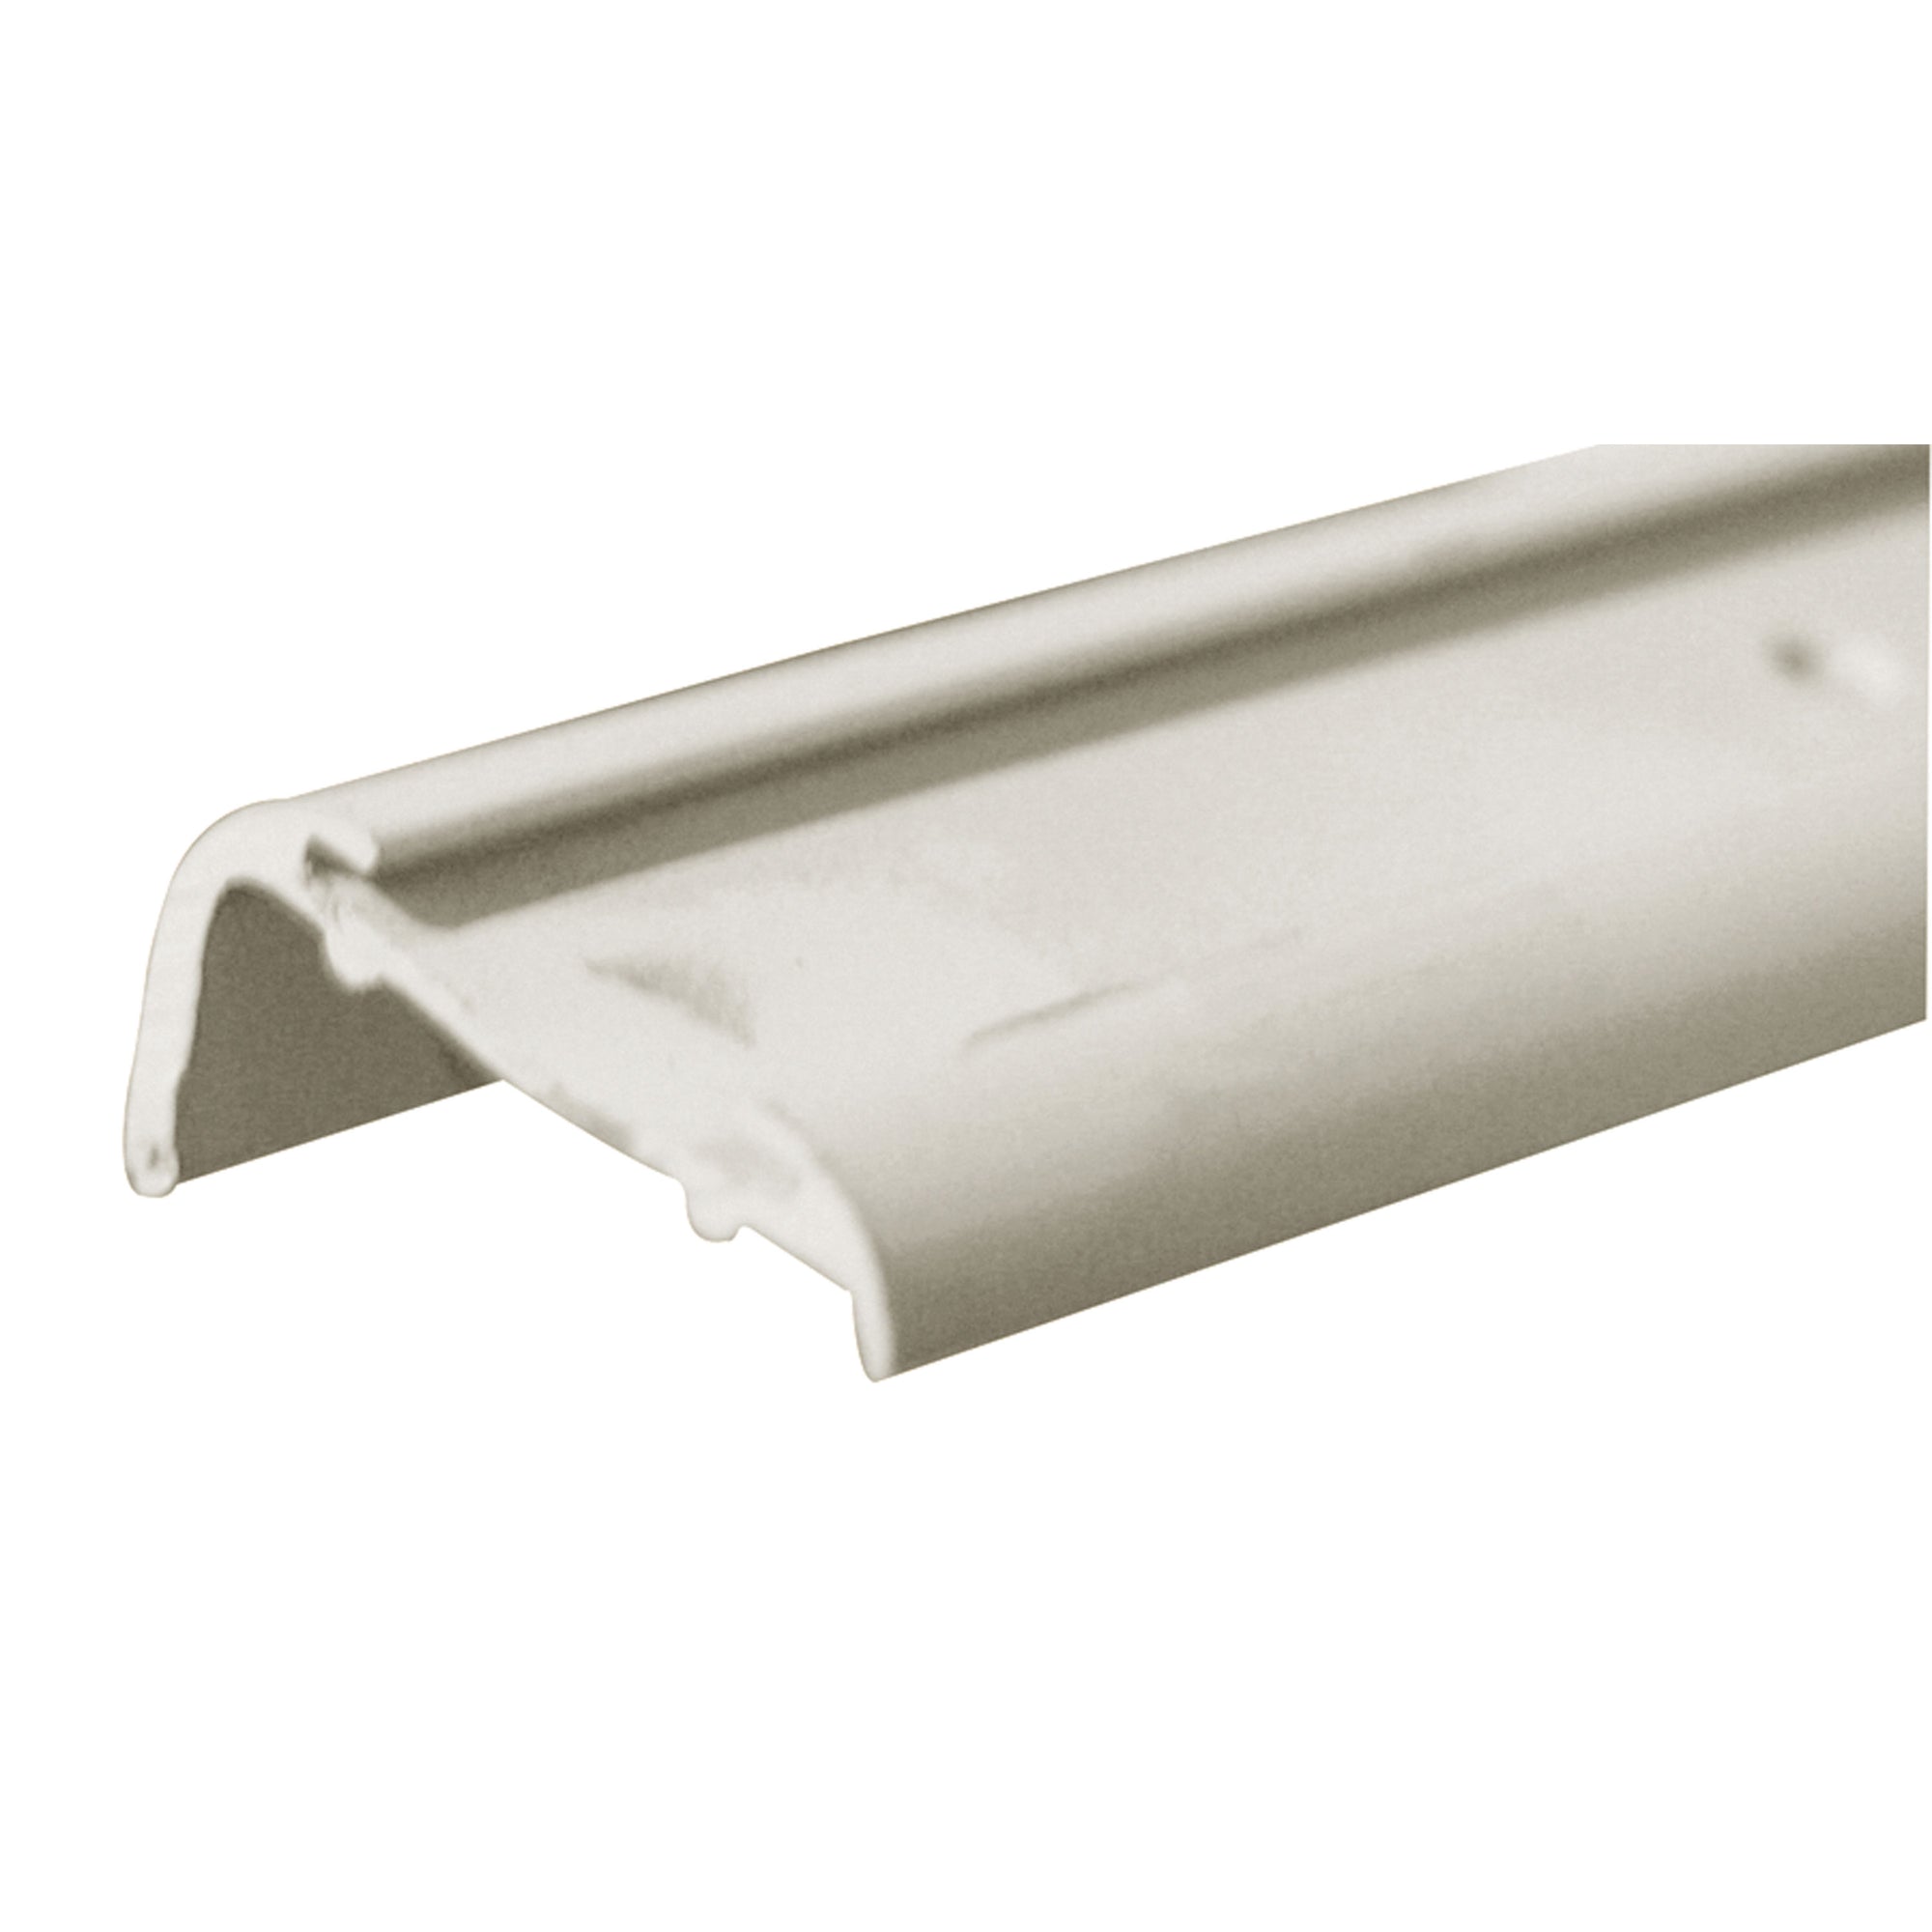 AP Products 021-85004-16 Insert Roof Edge - 16 ft.